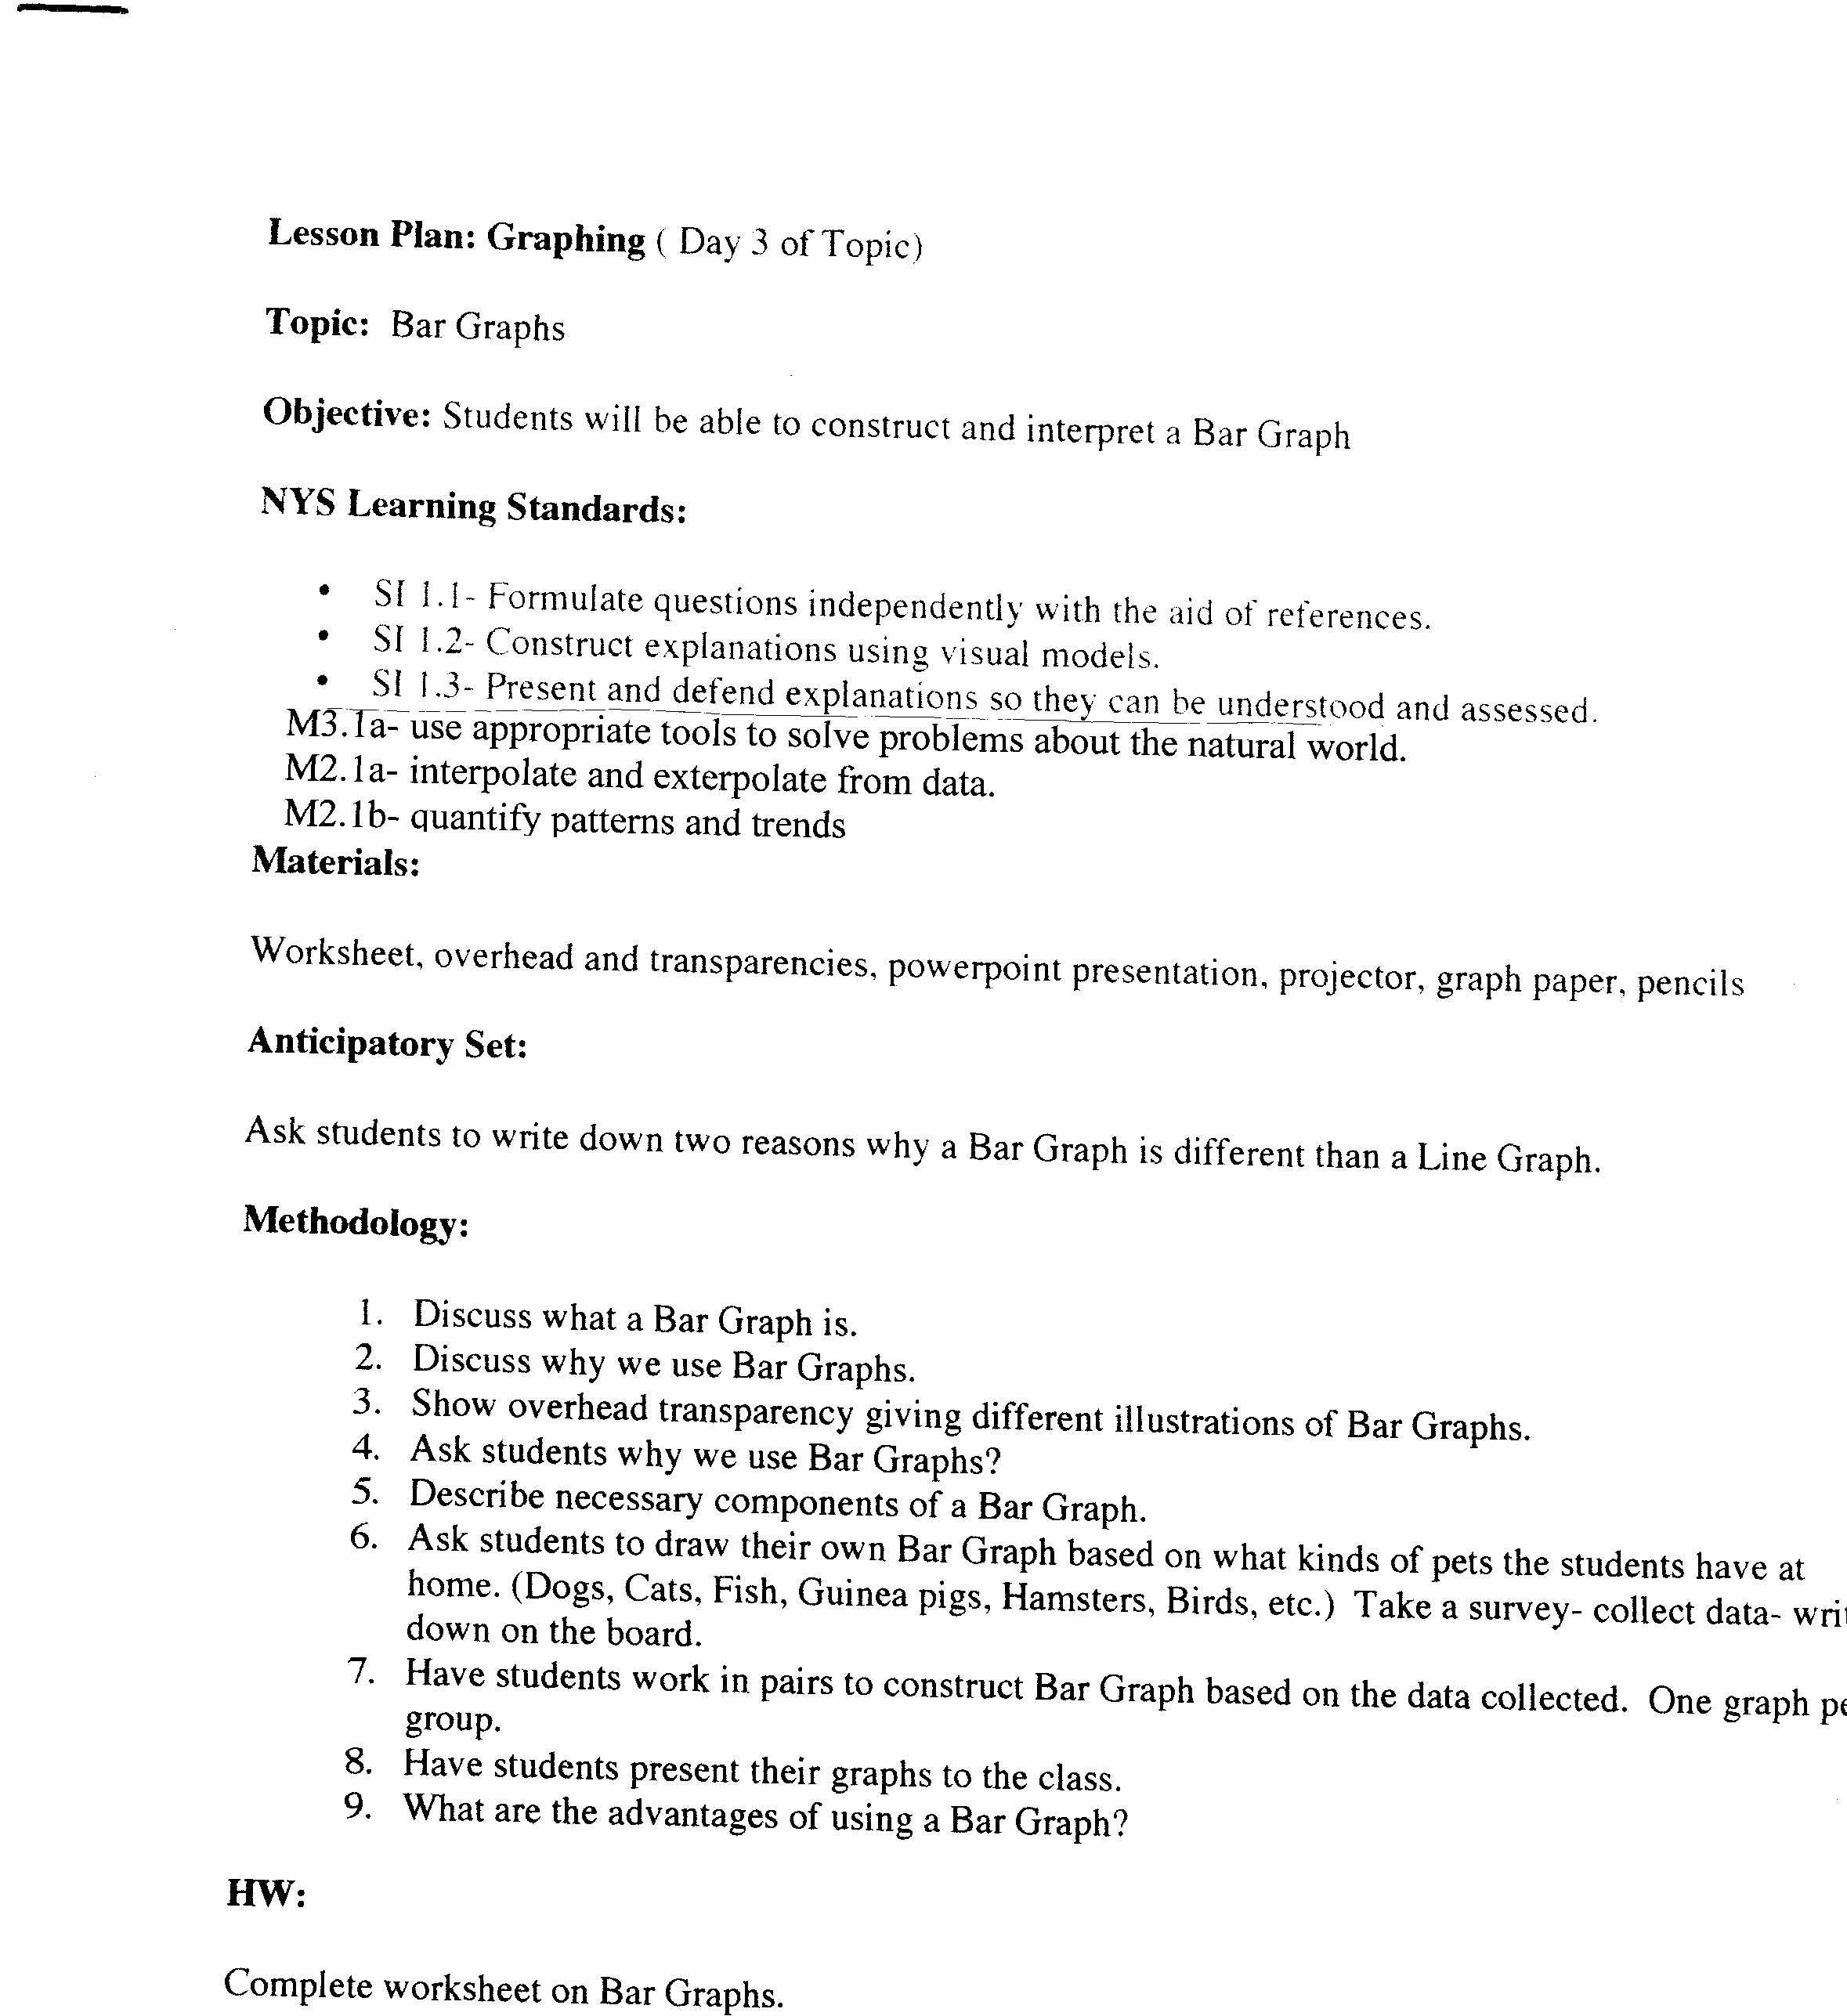 Principles Of Ecology Worksheet Answers Also 20 Population Ecology Graph Worksheet Document Design Ideas